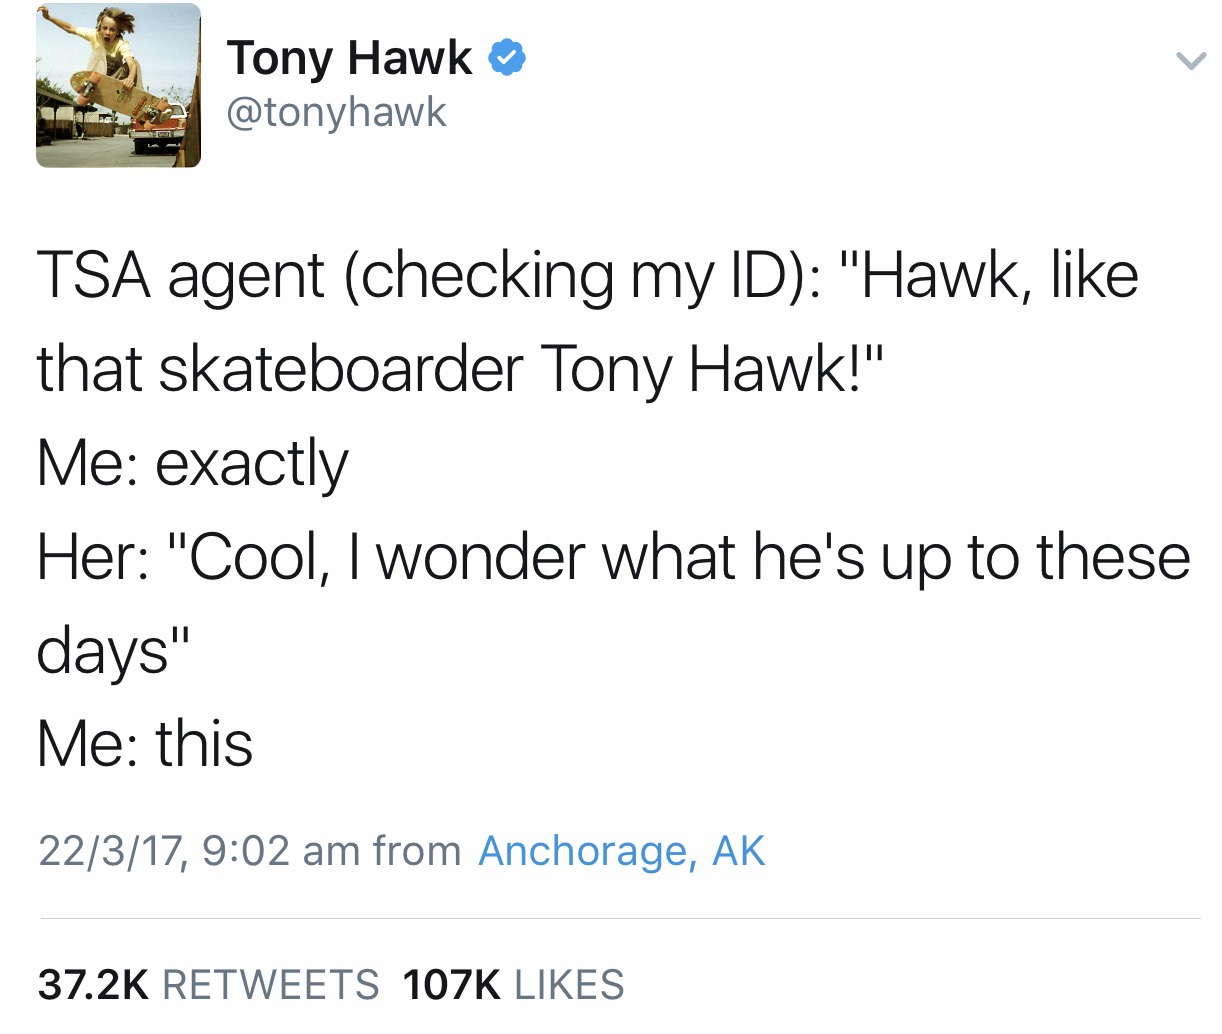 tony hawk up to these days - Tony Hawk Tsa agent checking my Id "Hawk, that skateboarder Tony Hawk!" Me exactly Her "Cool, I wonder what he's up to these days" Me this 22317, from Anchorage, Ak